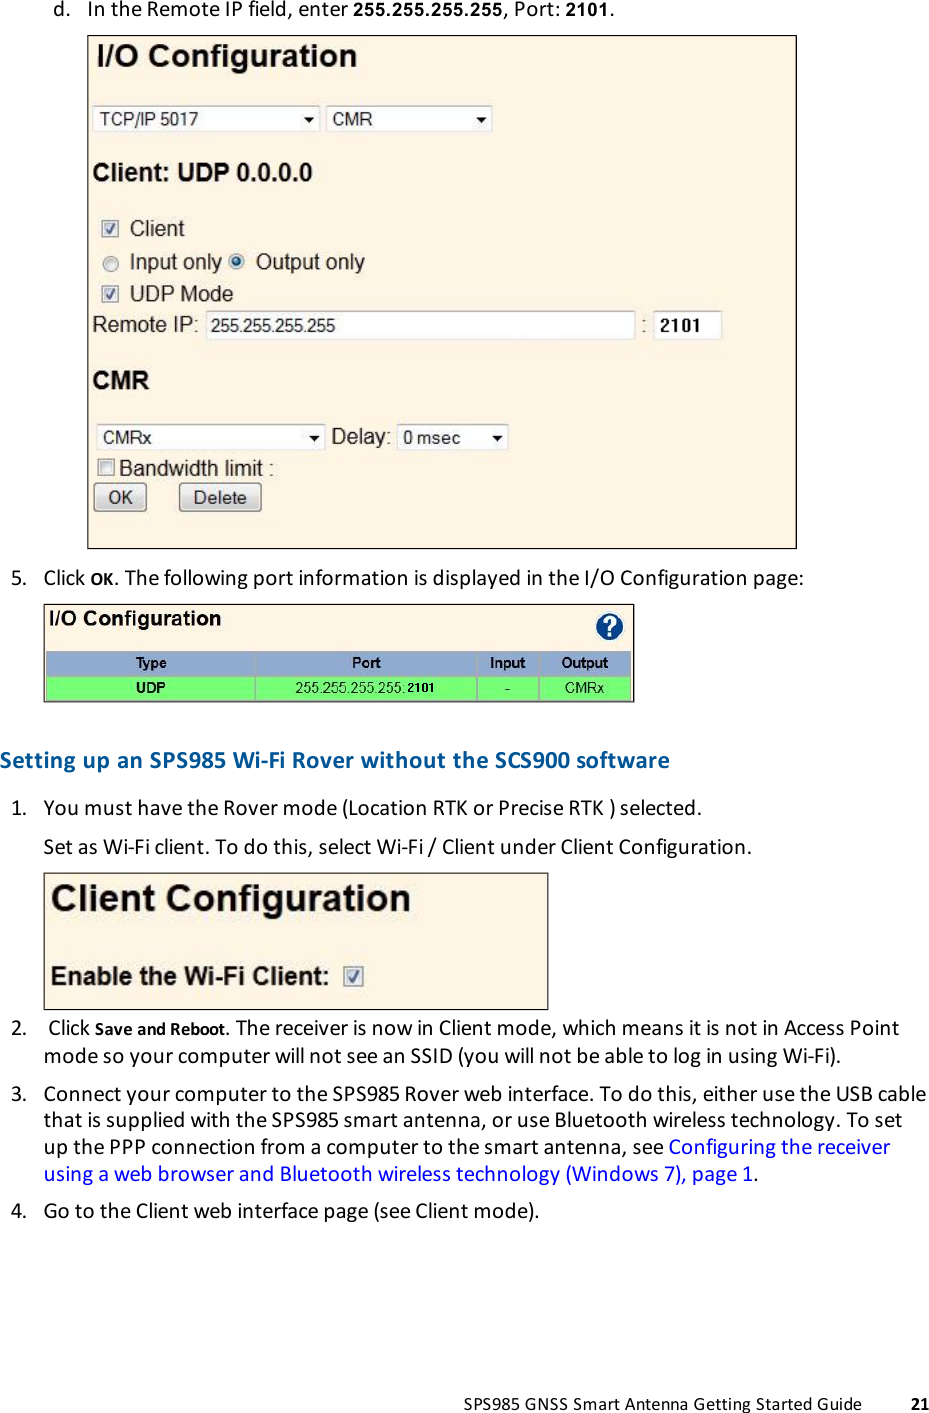 d. In the Remote IP field, enter 255.255.255.255, Port: 2101.5. Click OK. The following port information is displayed in the I/O Configuration page:Setting up an SPS985 Wi-Fi Rover without the SCS900 software1. You must have the Rover mode (Location RTK or Precise RTK ) selected.2.Set as Wi-Fi client. To do this, select Wi-Fi / Client under Client Configuration.Click Save and Reboot. The receiver is now in Client mode, which means it is not in Access Pointmode so your computer will not see an SSID (you will not be able to log in using Wi-Fi).3. Connect your computer to the SPS985 Rover web interface. To do this, either use the USB cablethat is supplied with the SPS985 smart antenna, or use Bluetooth wireless technology. To setup the PPP connection from a computer to the smart antenna, see Configuring the receiverusing a web browser and Bluetooth wireless technology (Windows 7), page 1.4. Go to the Client web interface page (see Client mode).SPS985 GNSS Smart Antenna Getting Started Guide 21